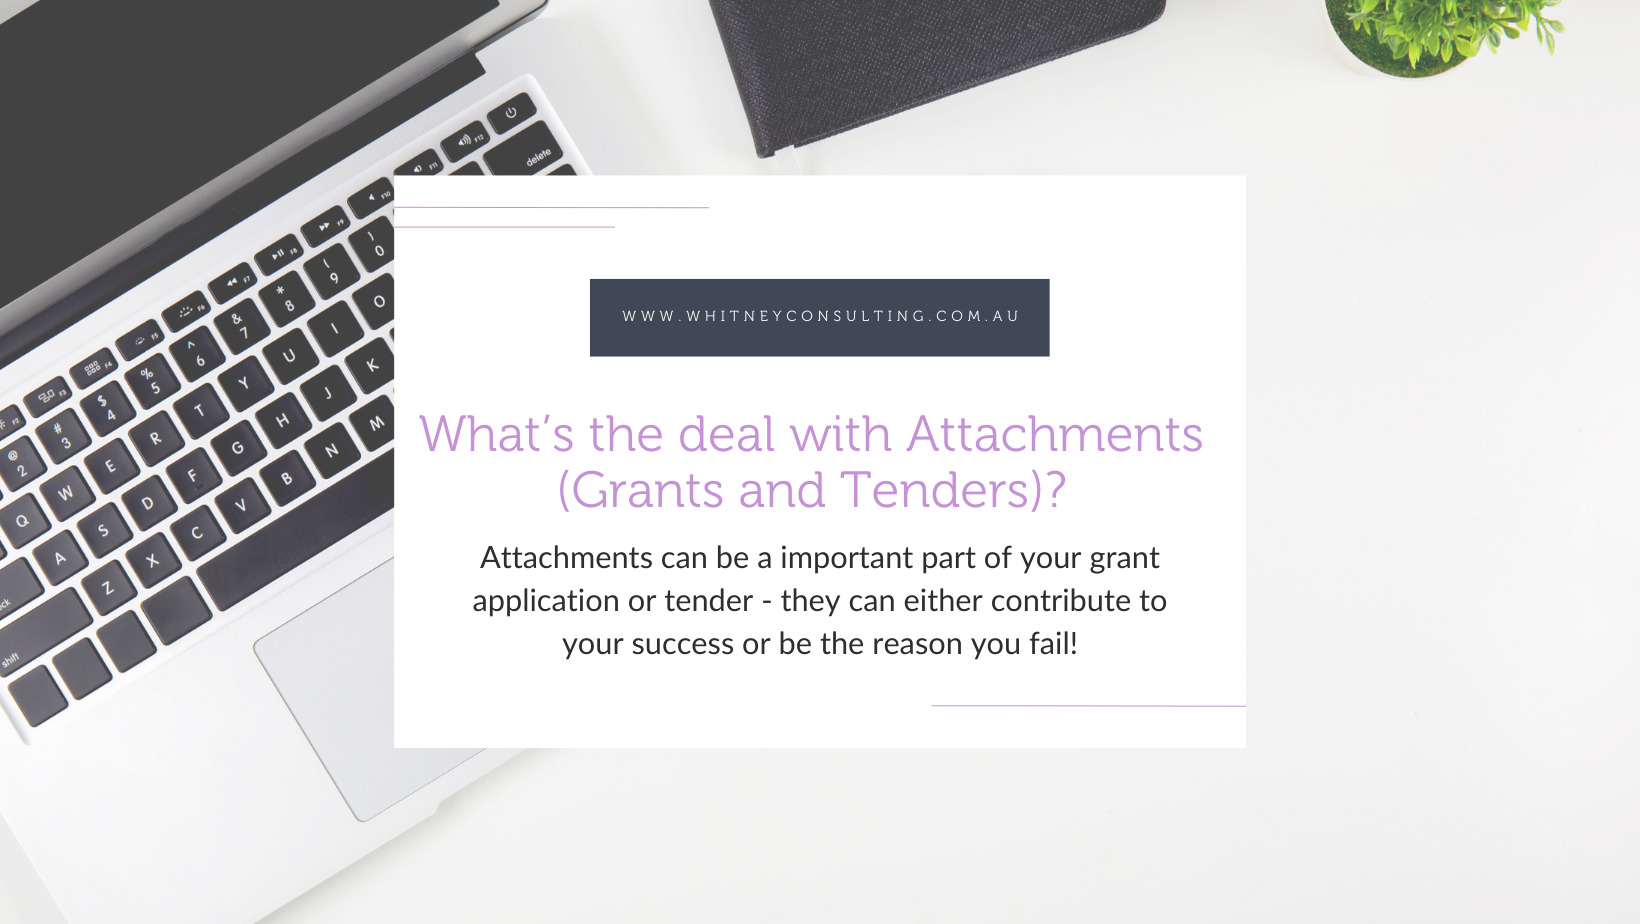 What’s the deal with Attachments (Grants and Tenders)?